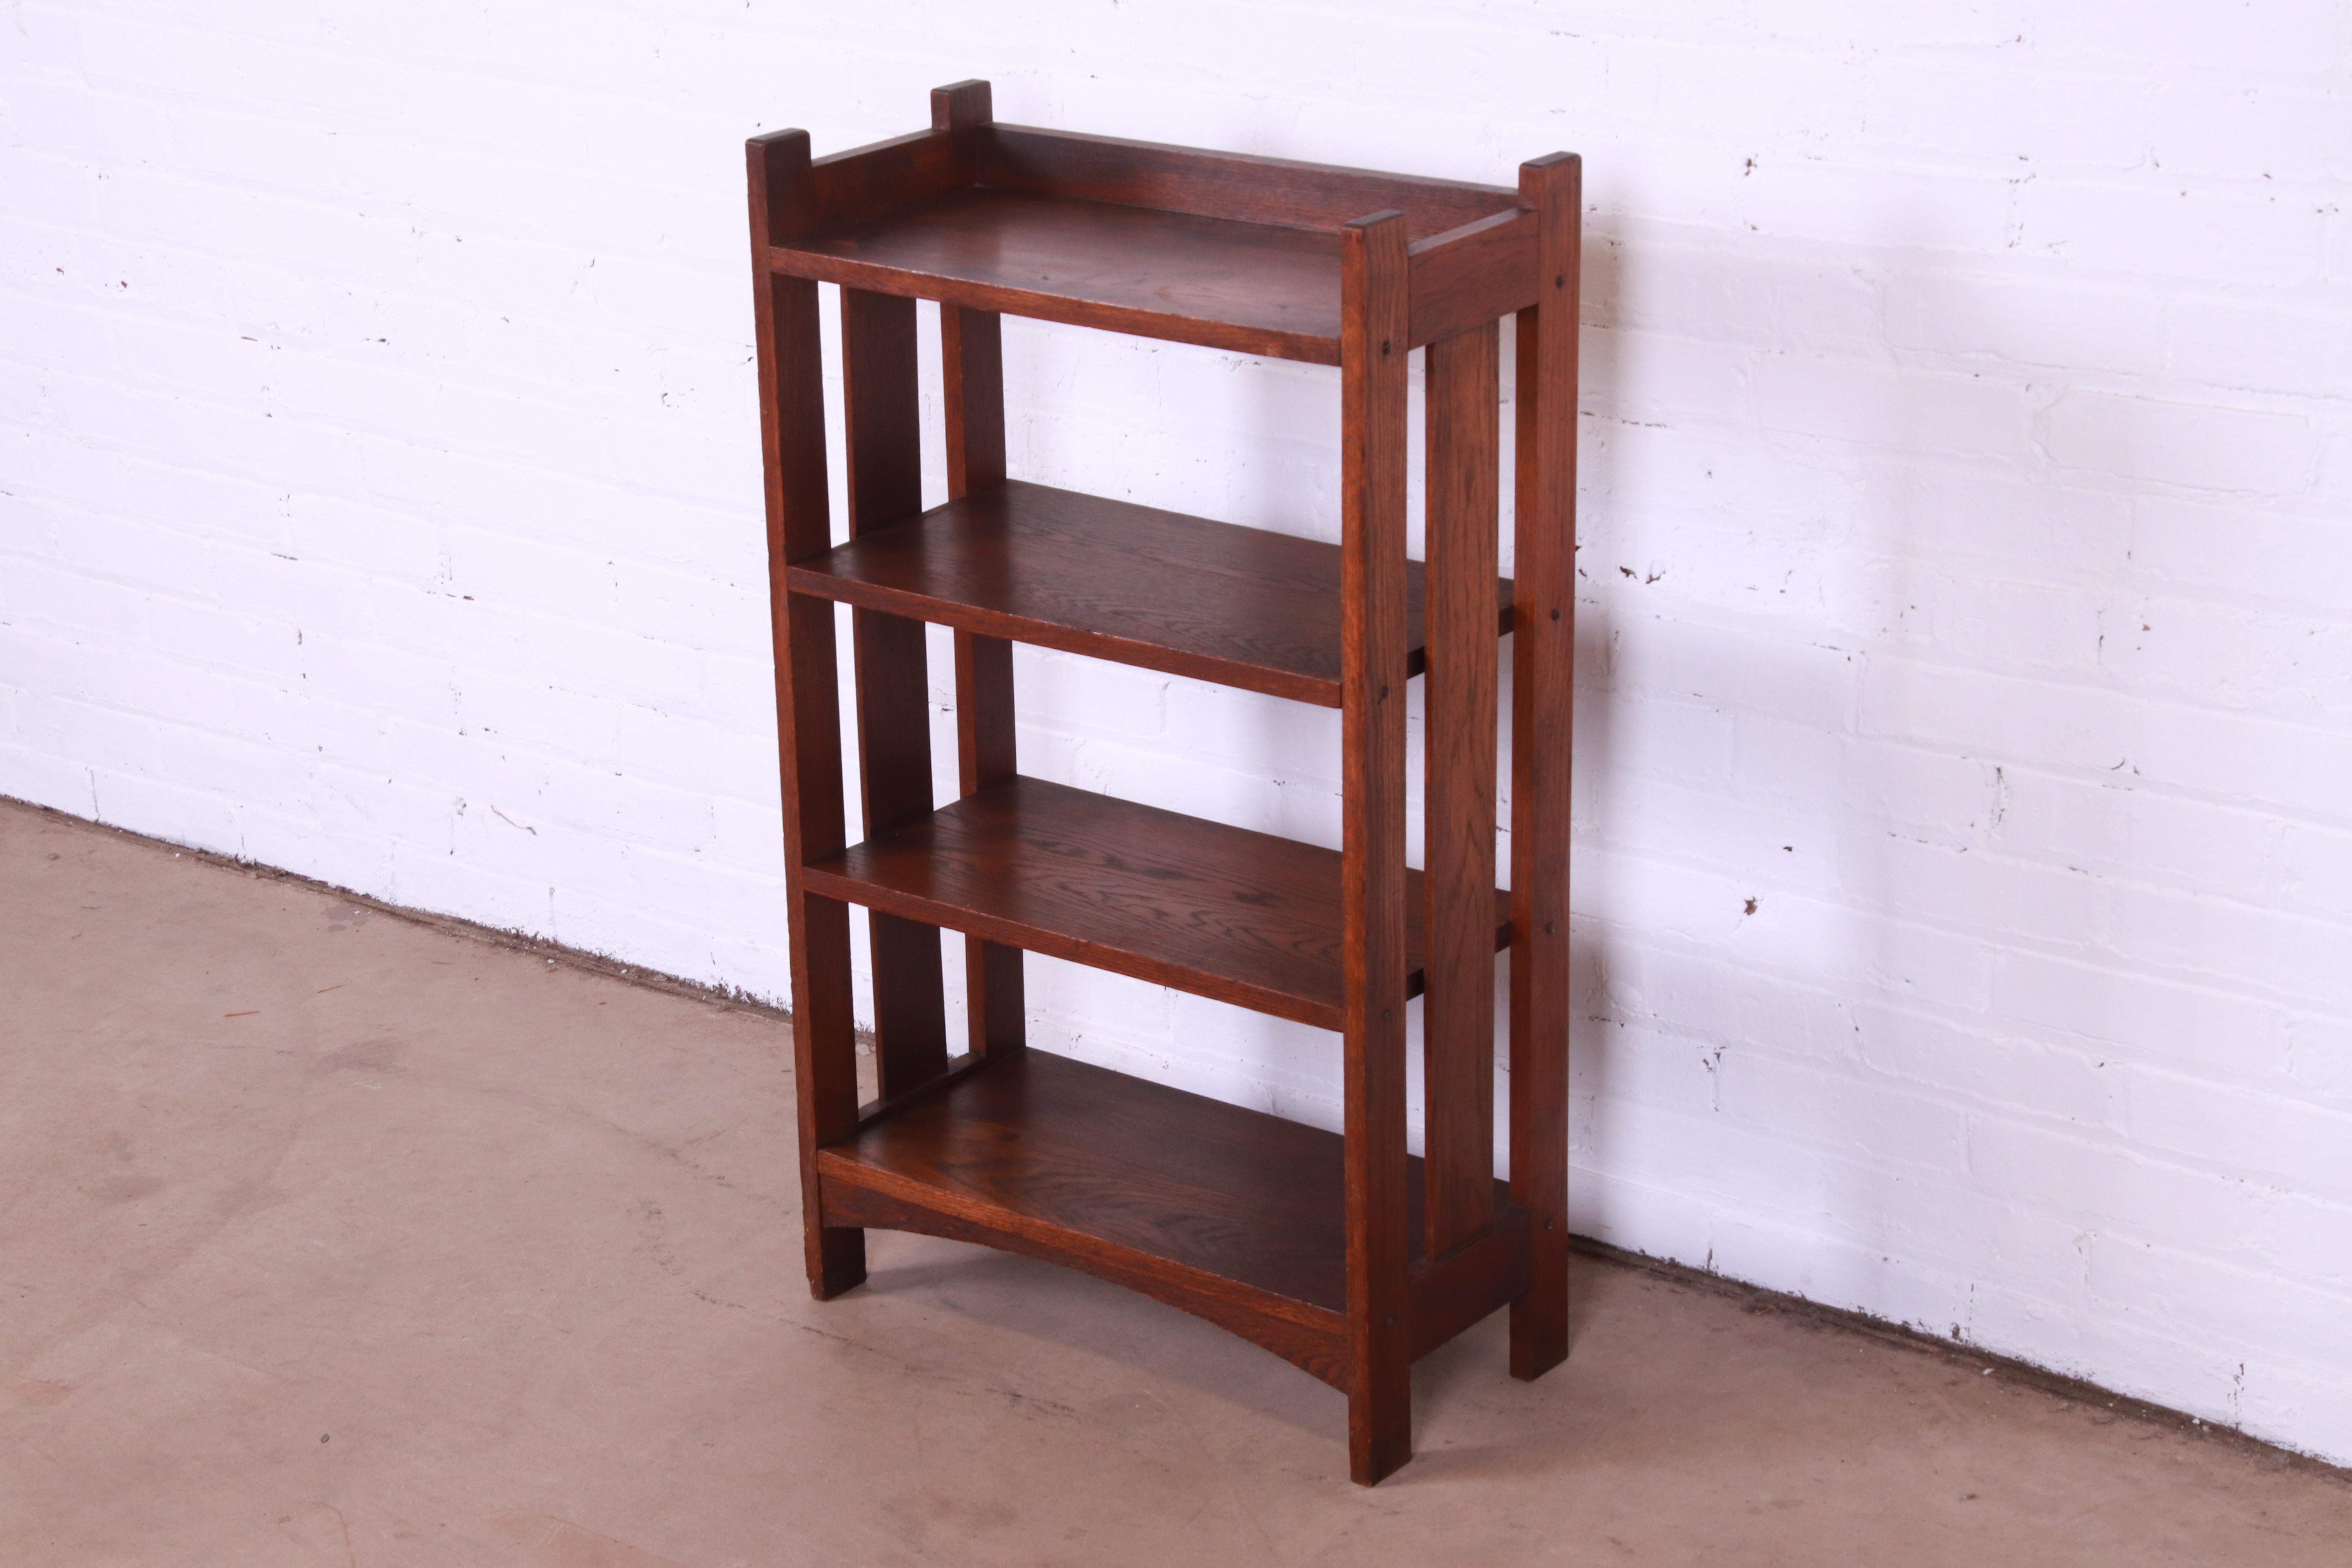 A beautiful antique Arts & Crafts Mission quarter sawn oak bookcase

Recently procured from Frank Lloyd Wright's DeRhodes House

In the manner of Stickley

USA, Circa 1900

Measures: 21.5